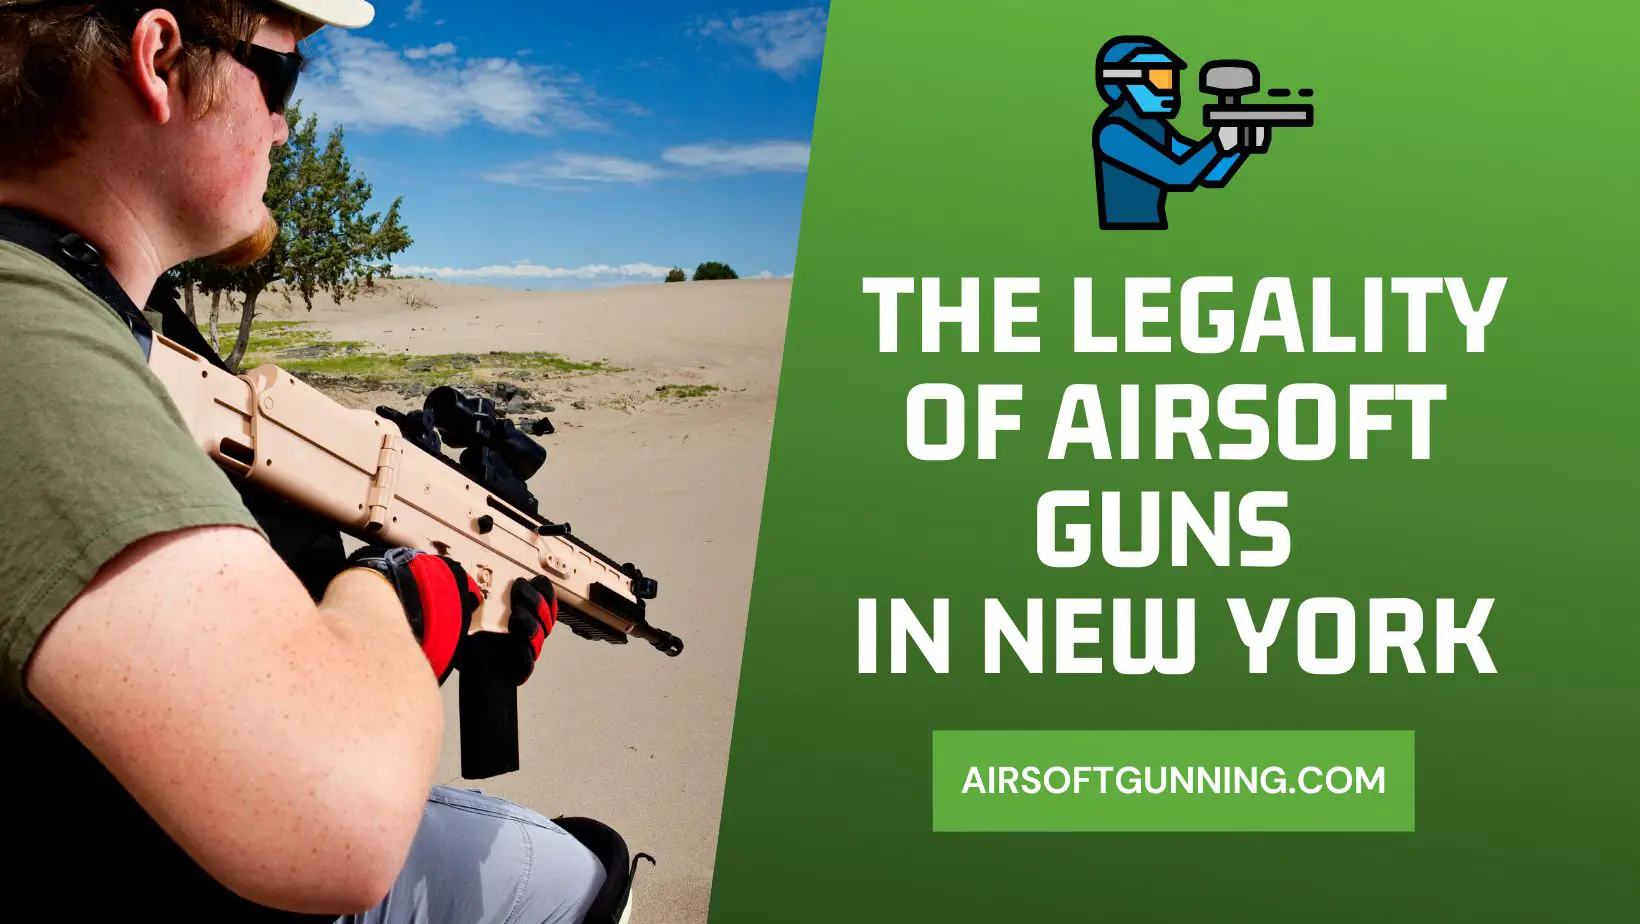 Legality of Airsoft Guns in New York